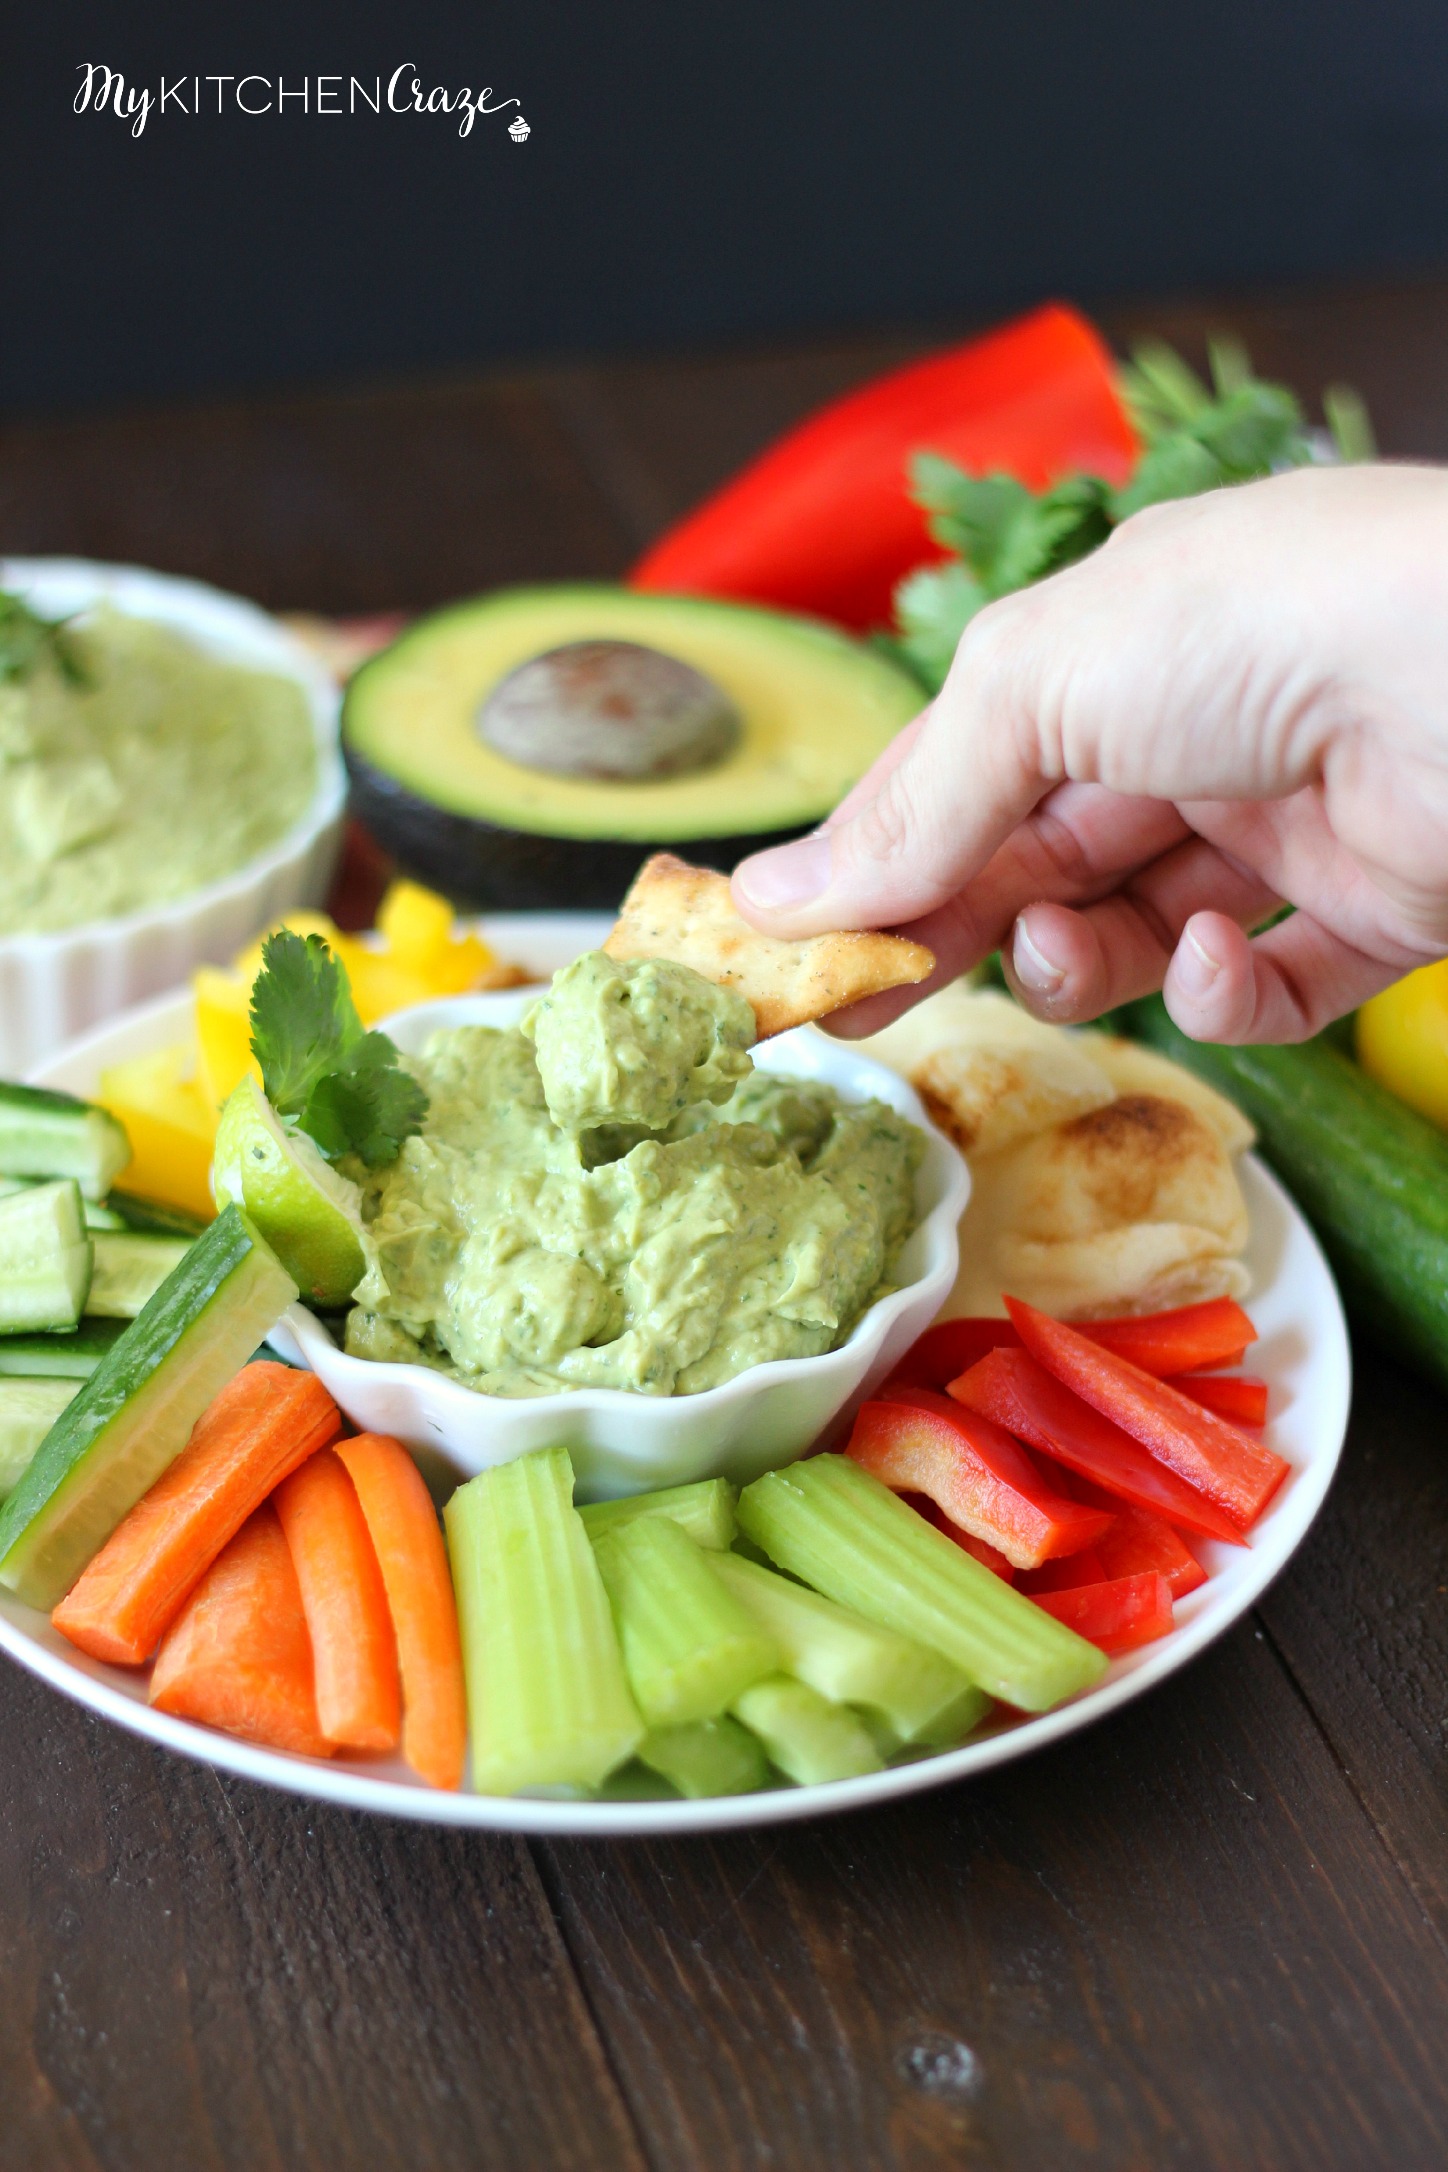 Avocado Yogurt Dip ~ mykitchencraze.com ~ Perfect for all sorts of vegetables and crackers. This dip needs to be at your next party!